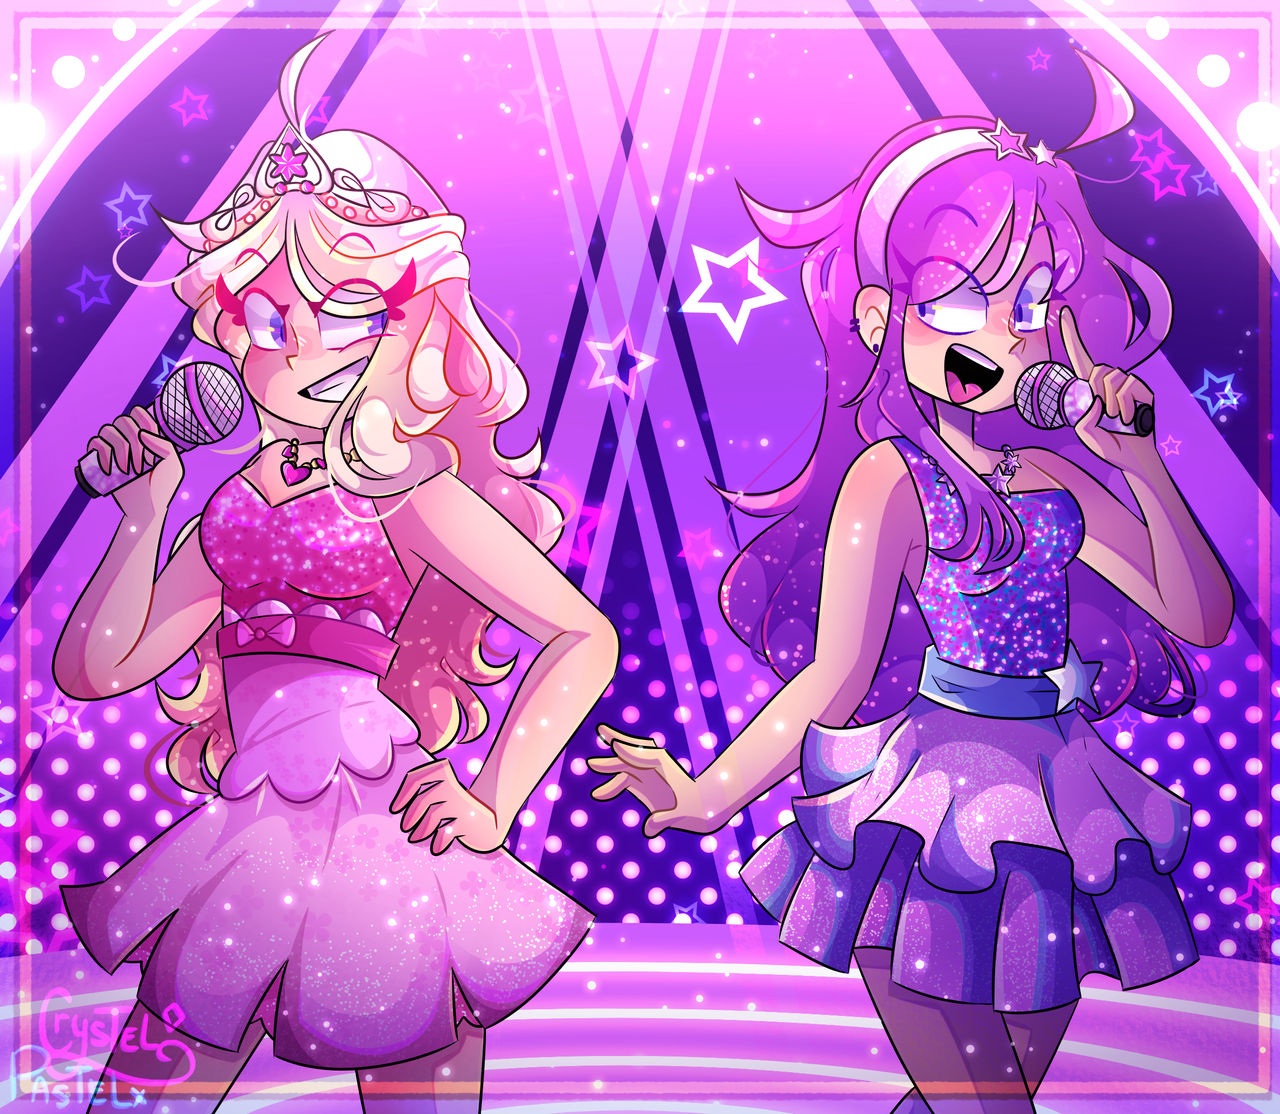 Barbie Princess And The Popstar//FANART!// by Cryslly on DeviantArt